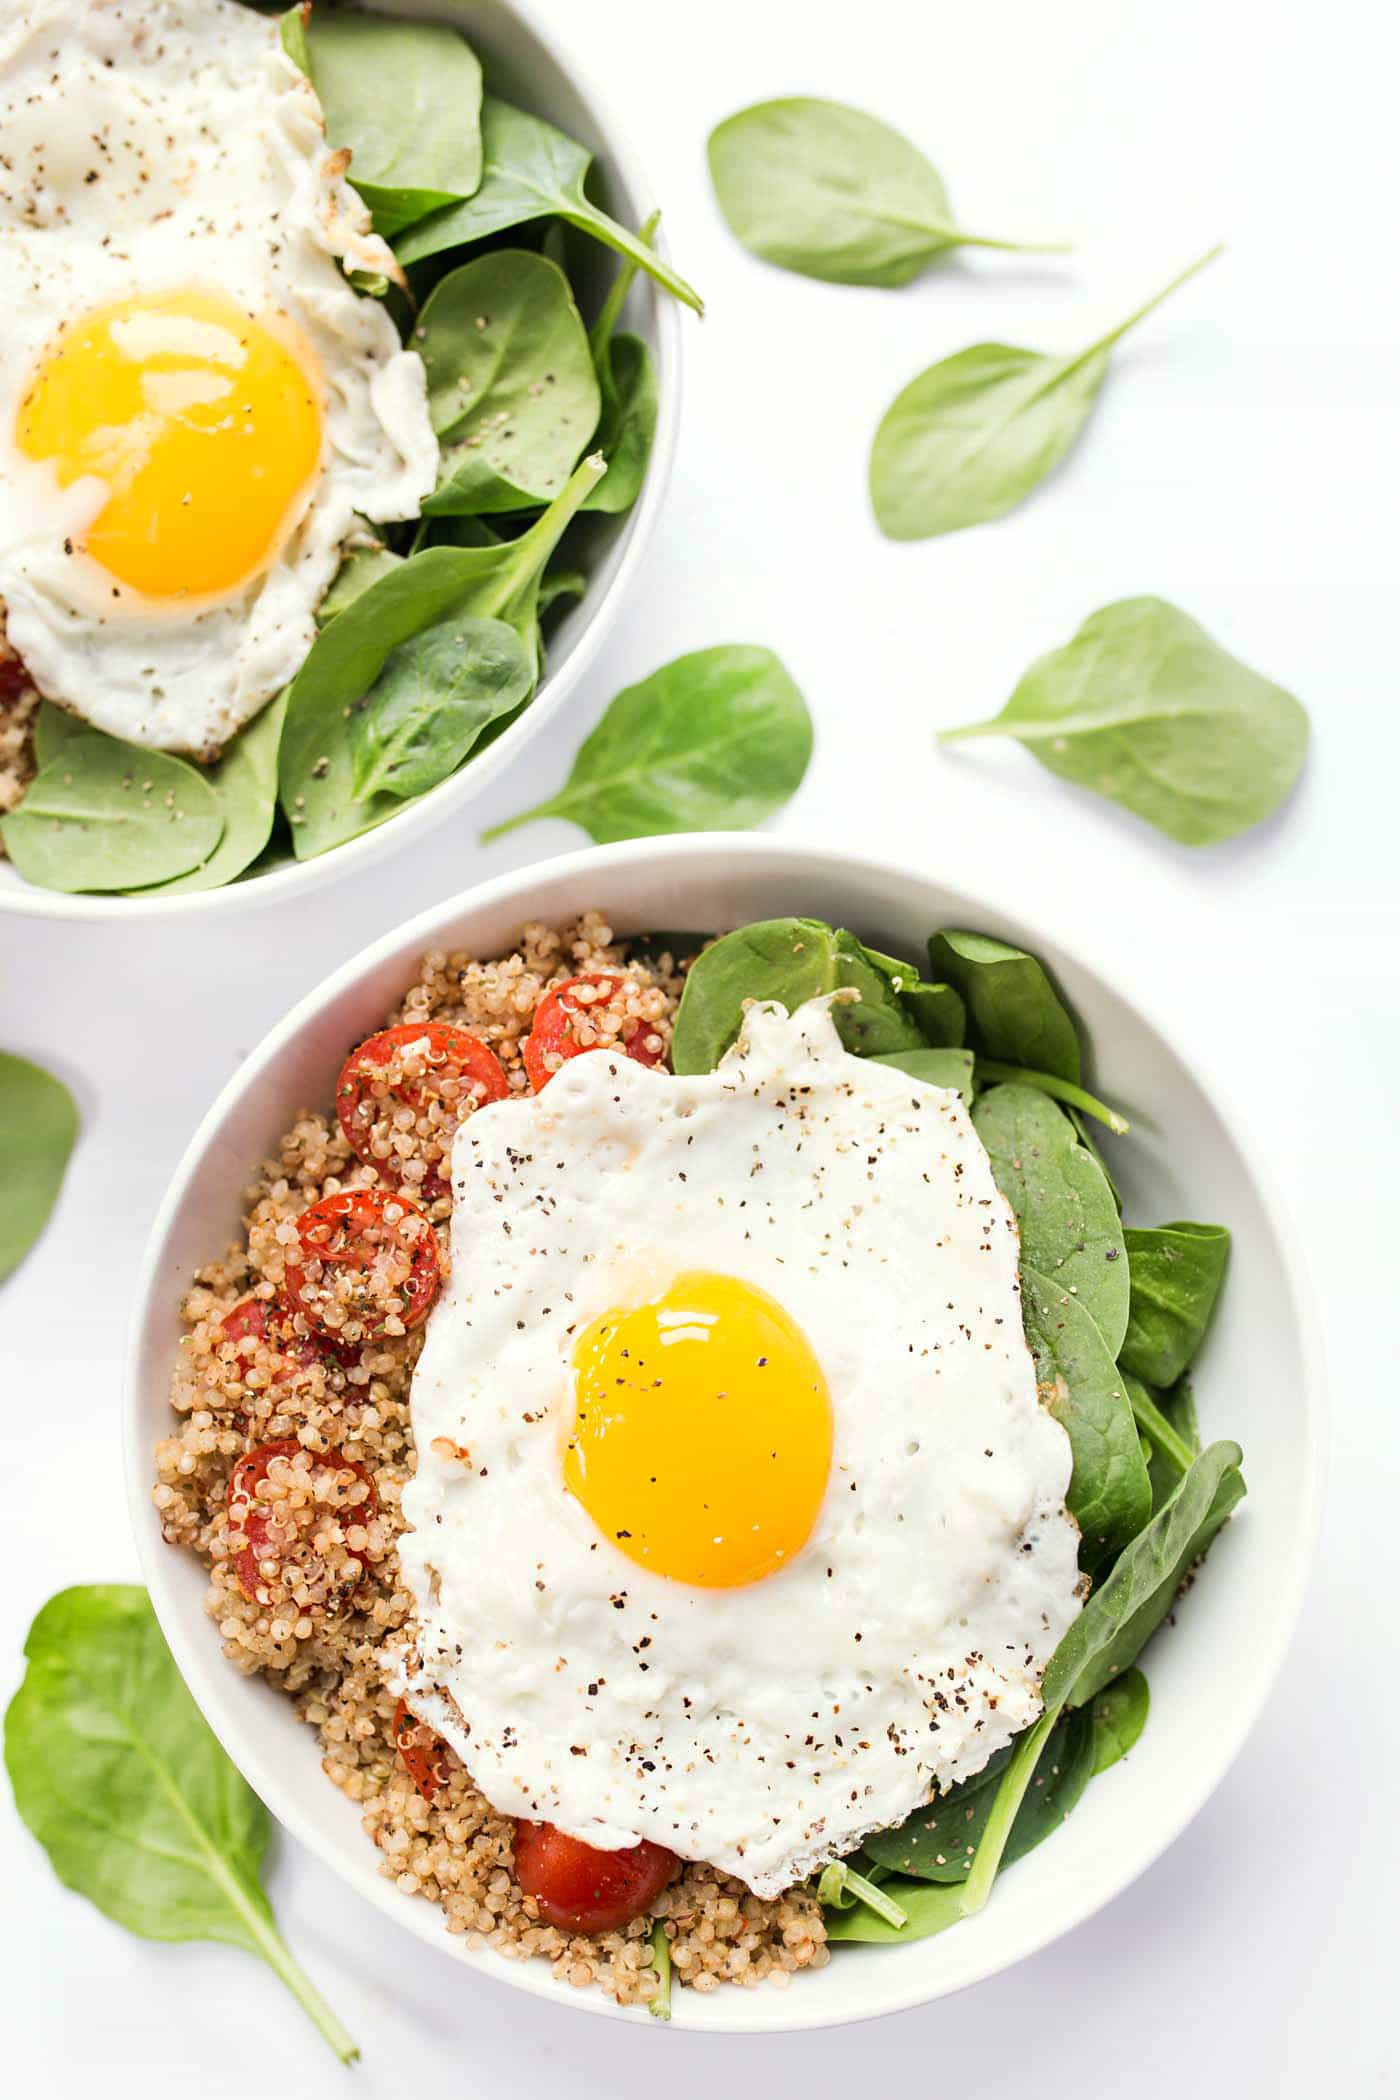 Savory Breakfast Quinoa Bowls with spinach, tomatoes and fried eggs on top!